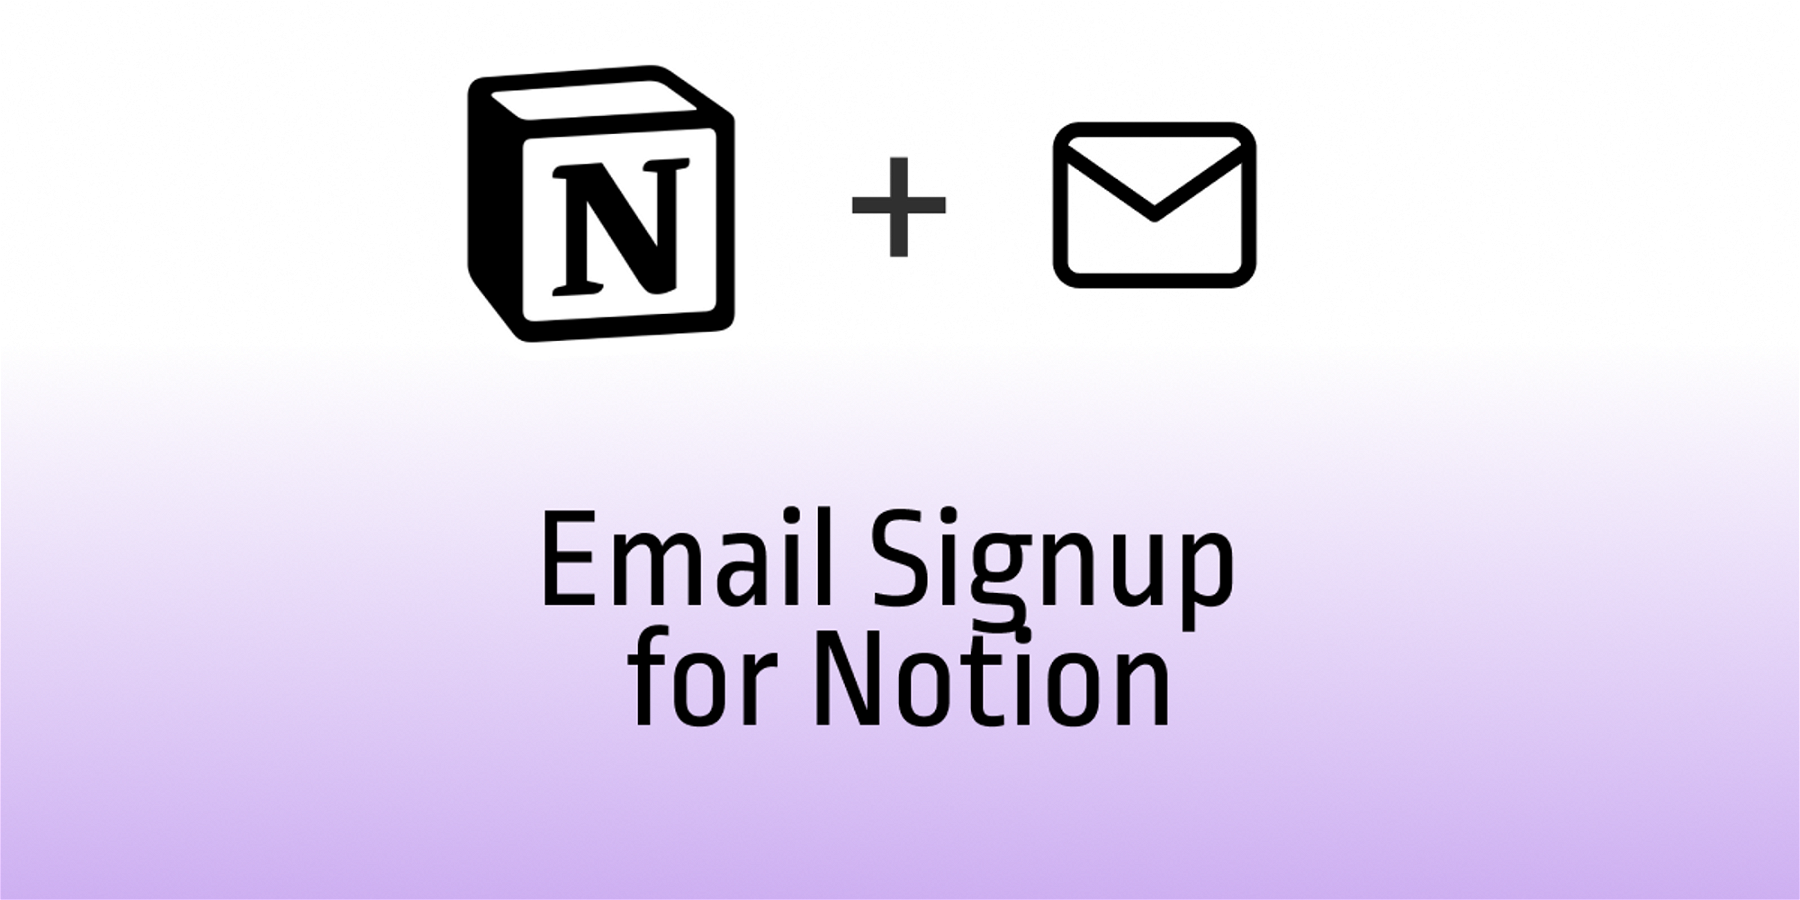 How to Use Email Signup with Sotion: Easy Member Registration for Your Notion Site